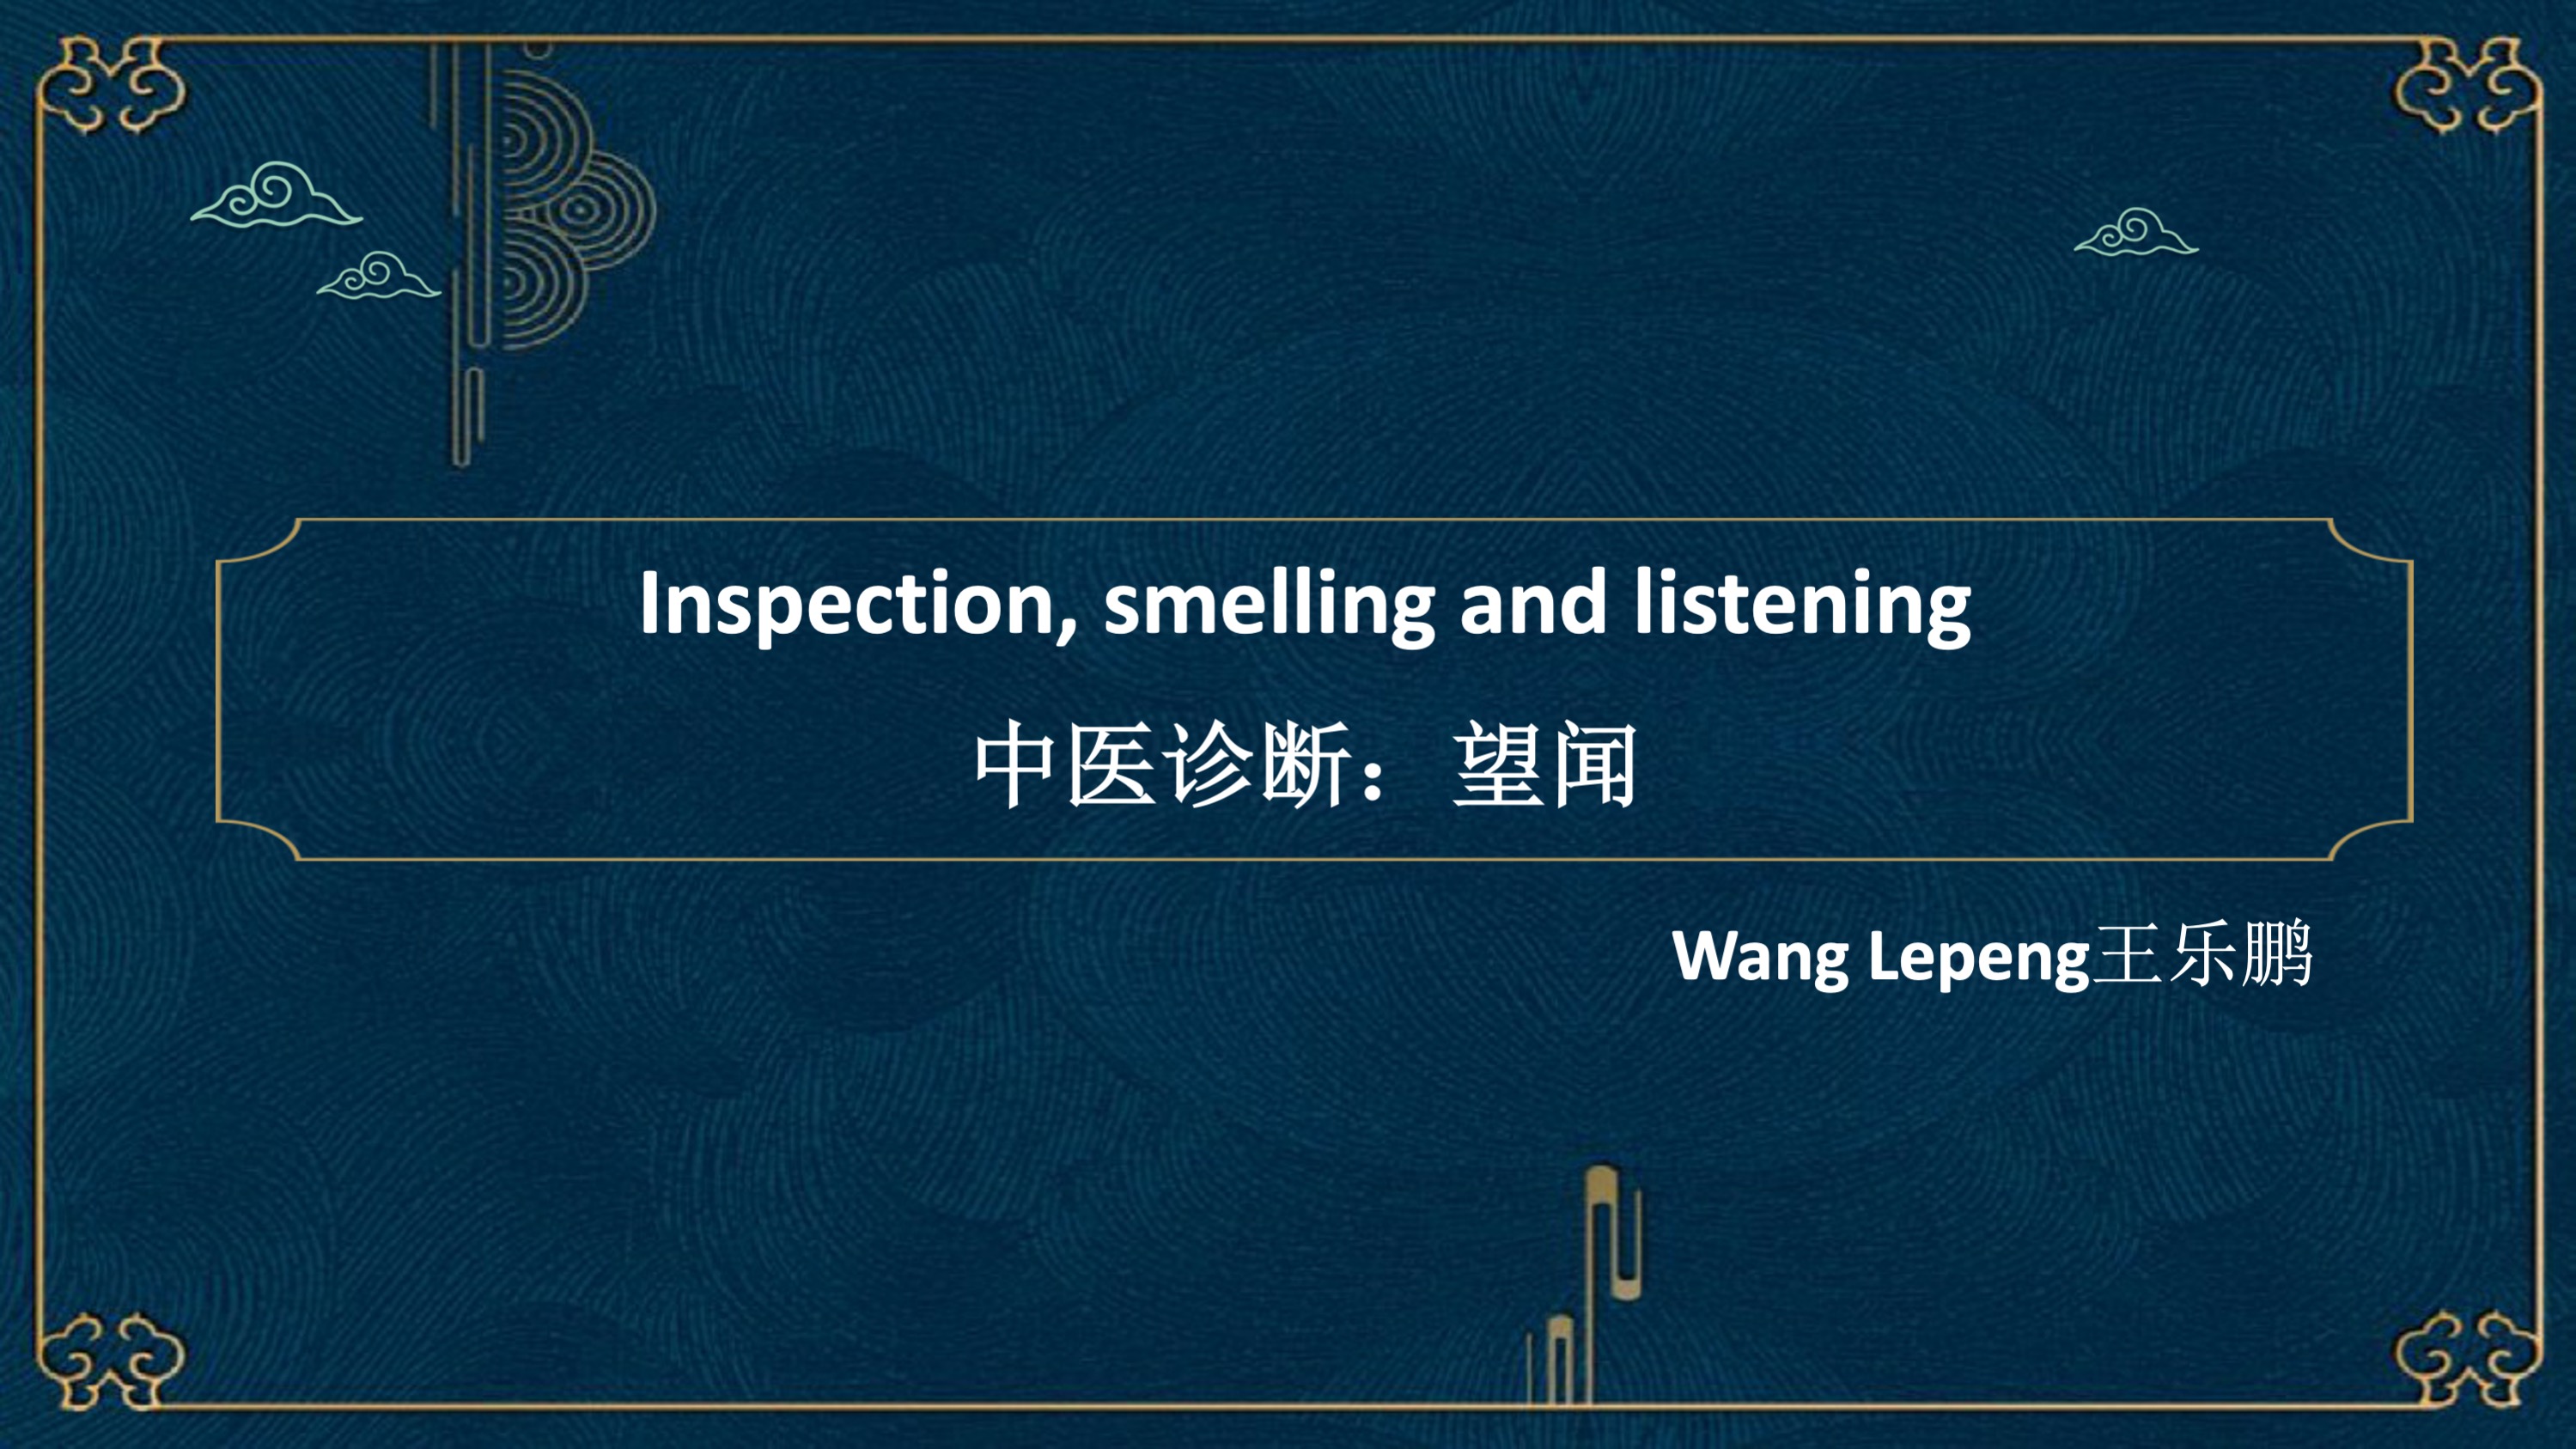 Inspection, smelling and listening